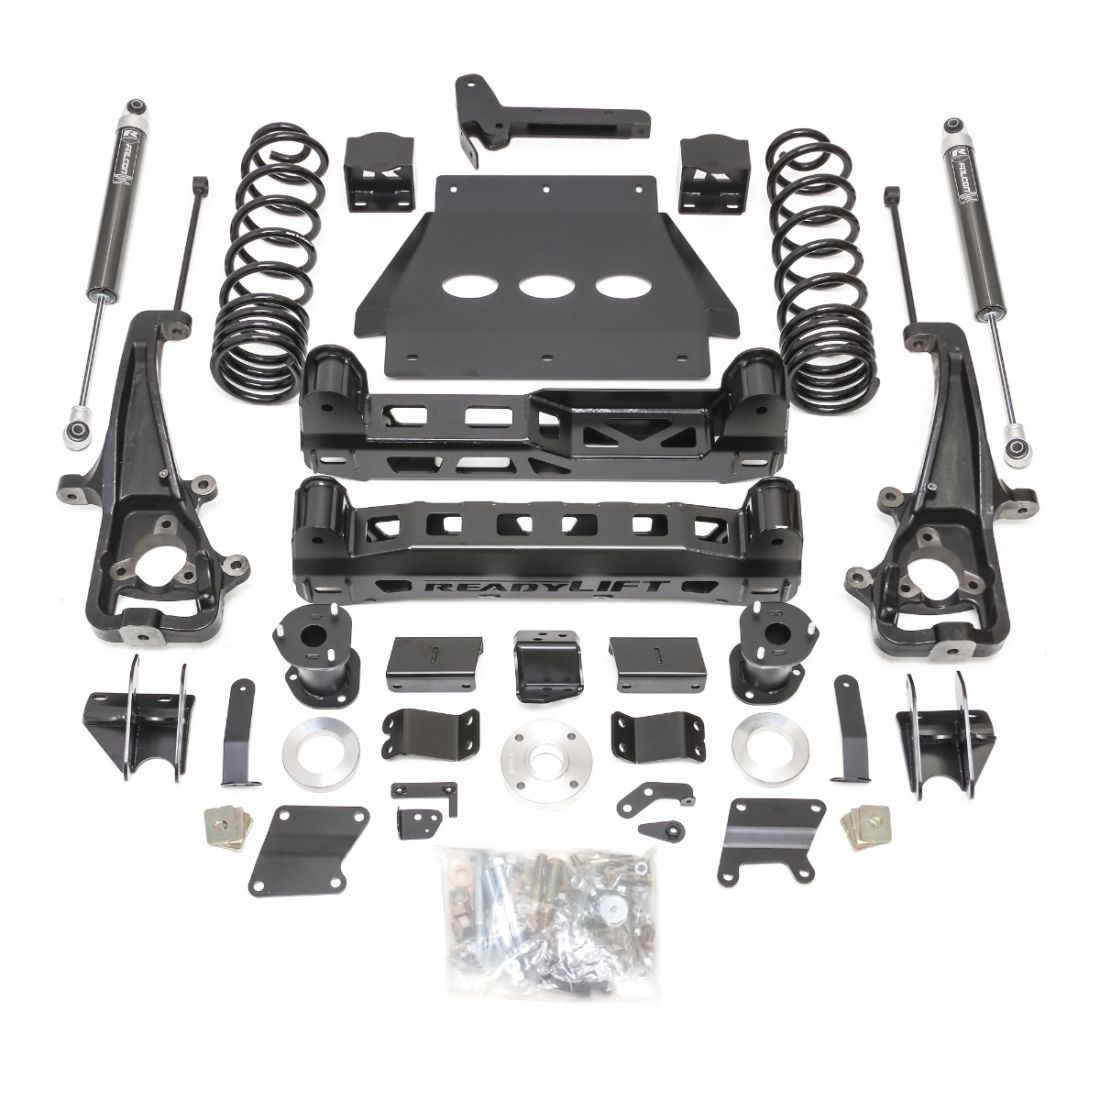 ReadyLIFT | Shop Complete Kits